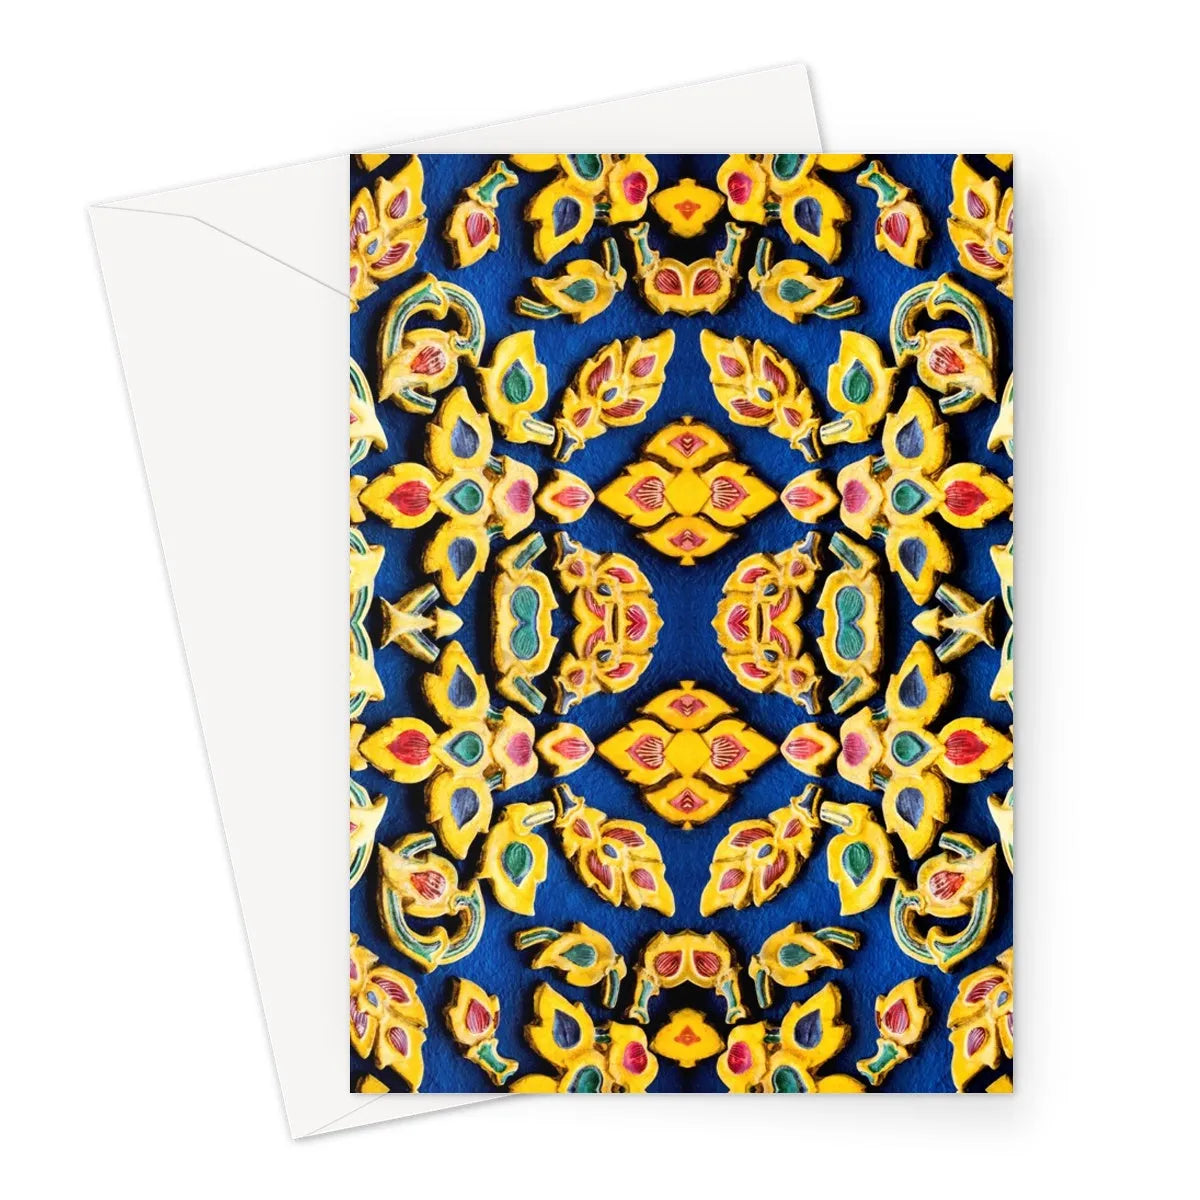 Ayodhya - Traditional Thai Design Mosaic Art Greeting Card - A5 Portrait / 1 Card - Greeting & Note Cards - Aesthetic